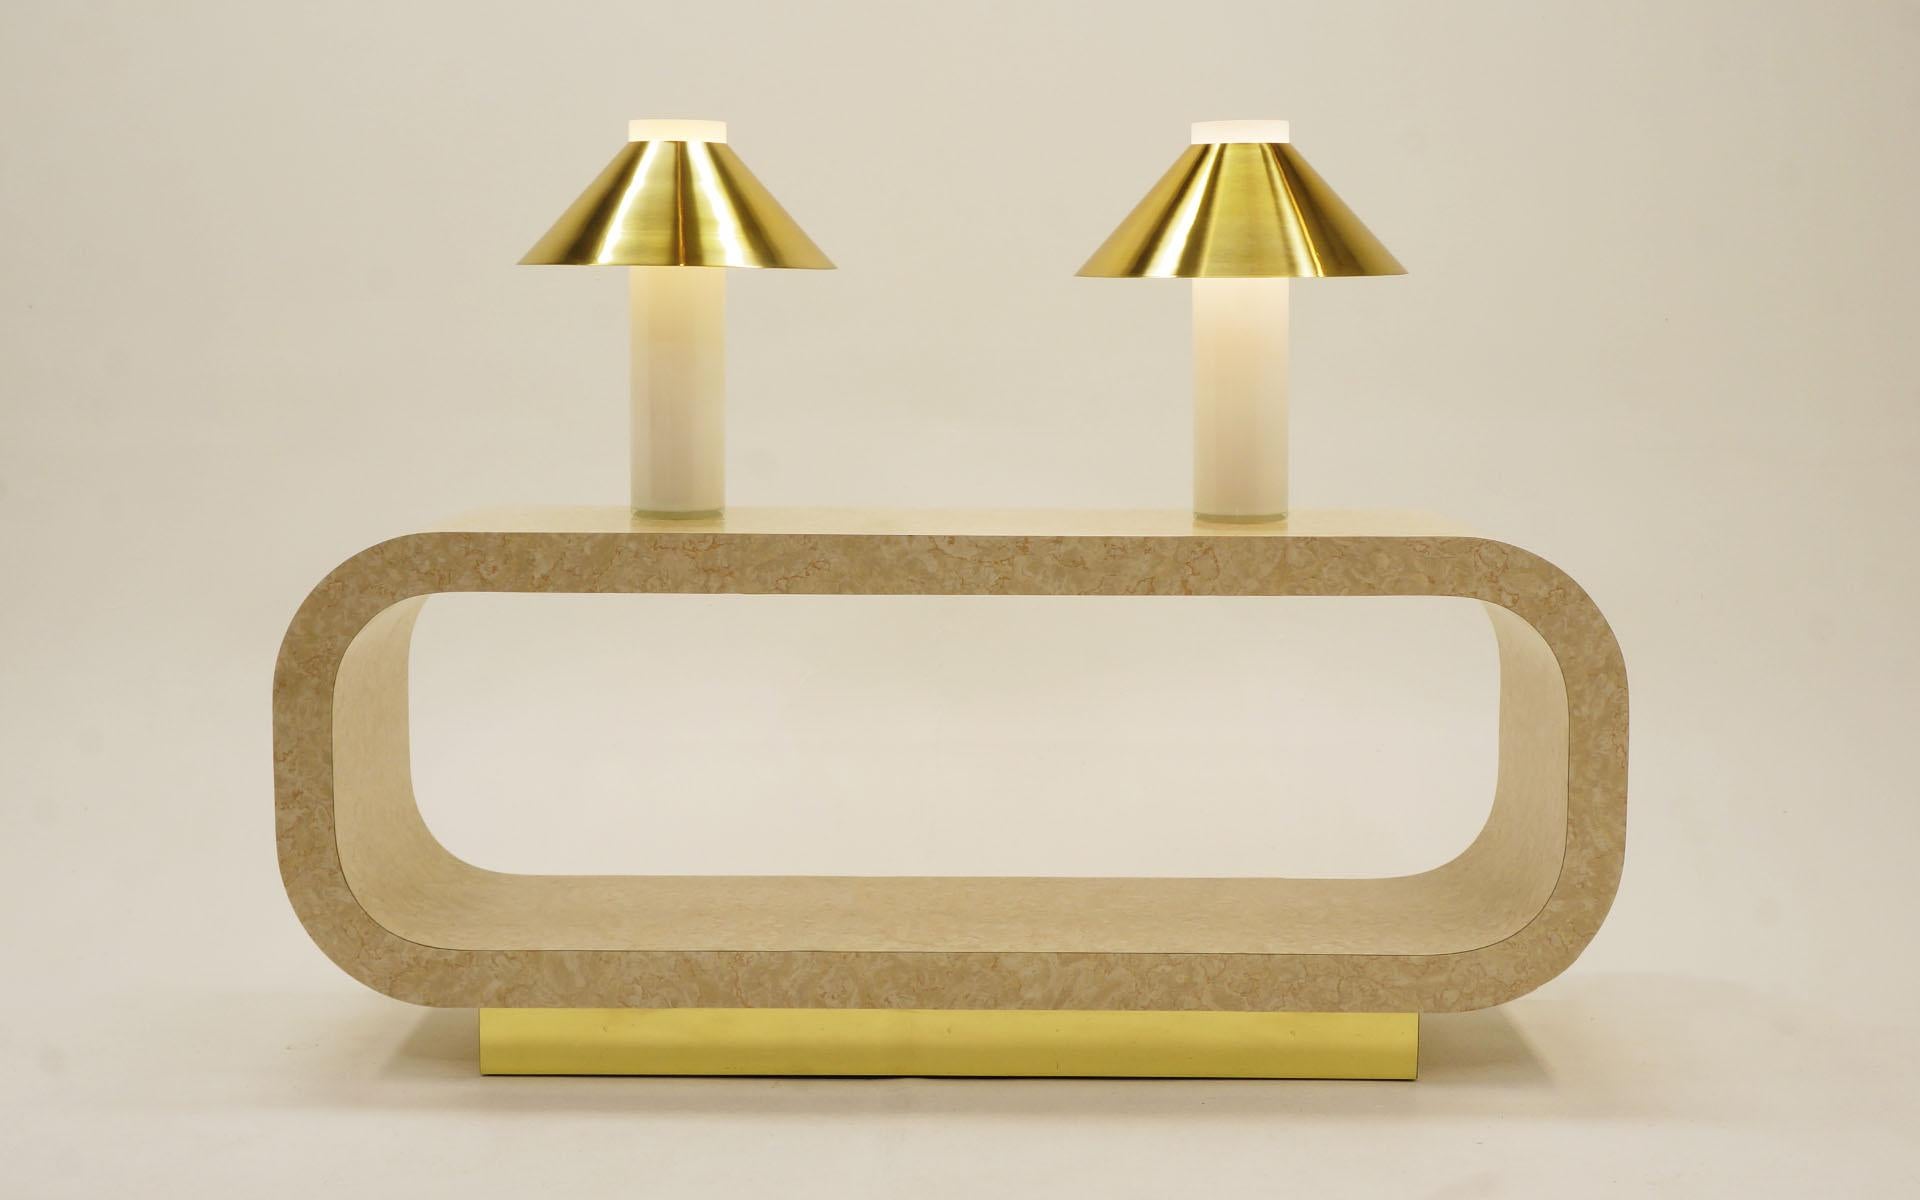 Pair of 1970s table lamps featuring white blown glass tubes housing the lamp stem and light with brass shades that ingeniously slip over the top of the base. The photos may look somewhat yellow, but the glass is white in person. We don't know the